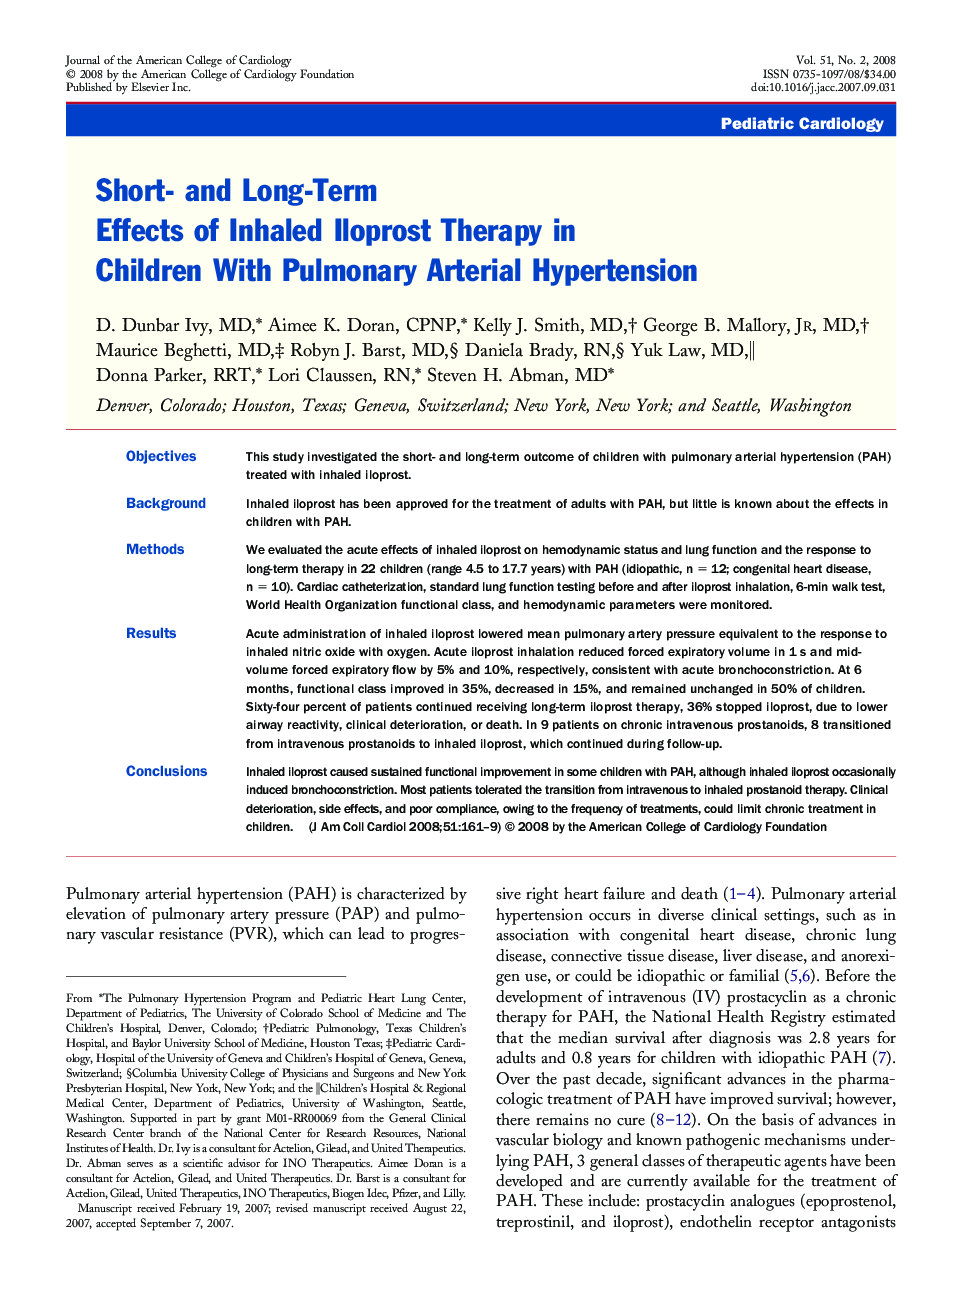 Short- and Long-Term Effects of Inhaled Iloprost Therapy in Children With Pulmonary Arterial Hypertension 